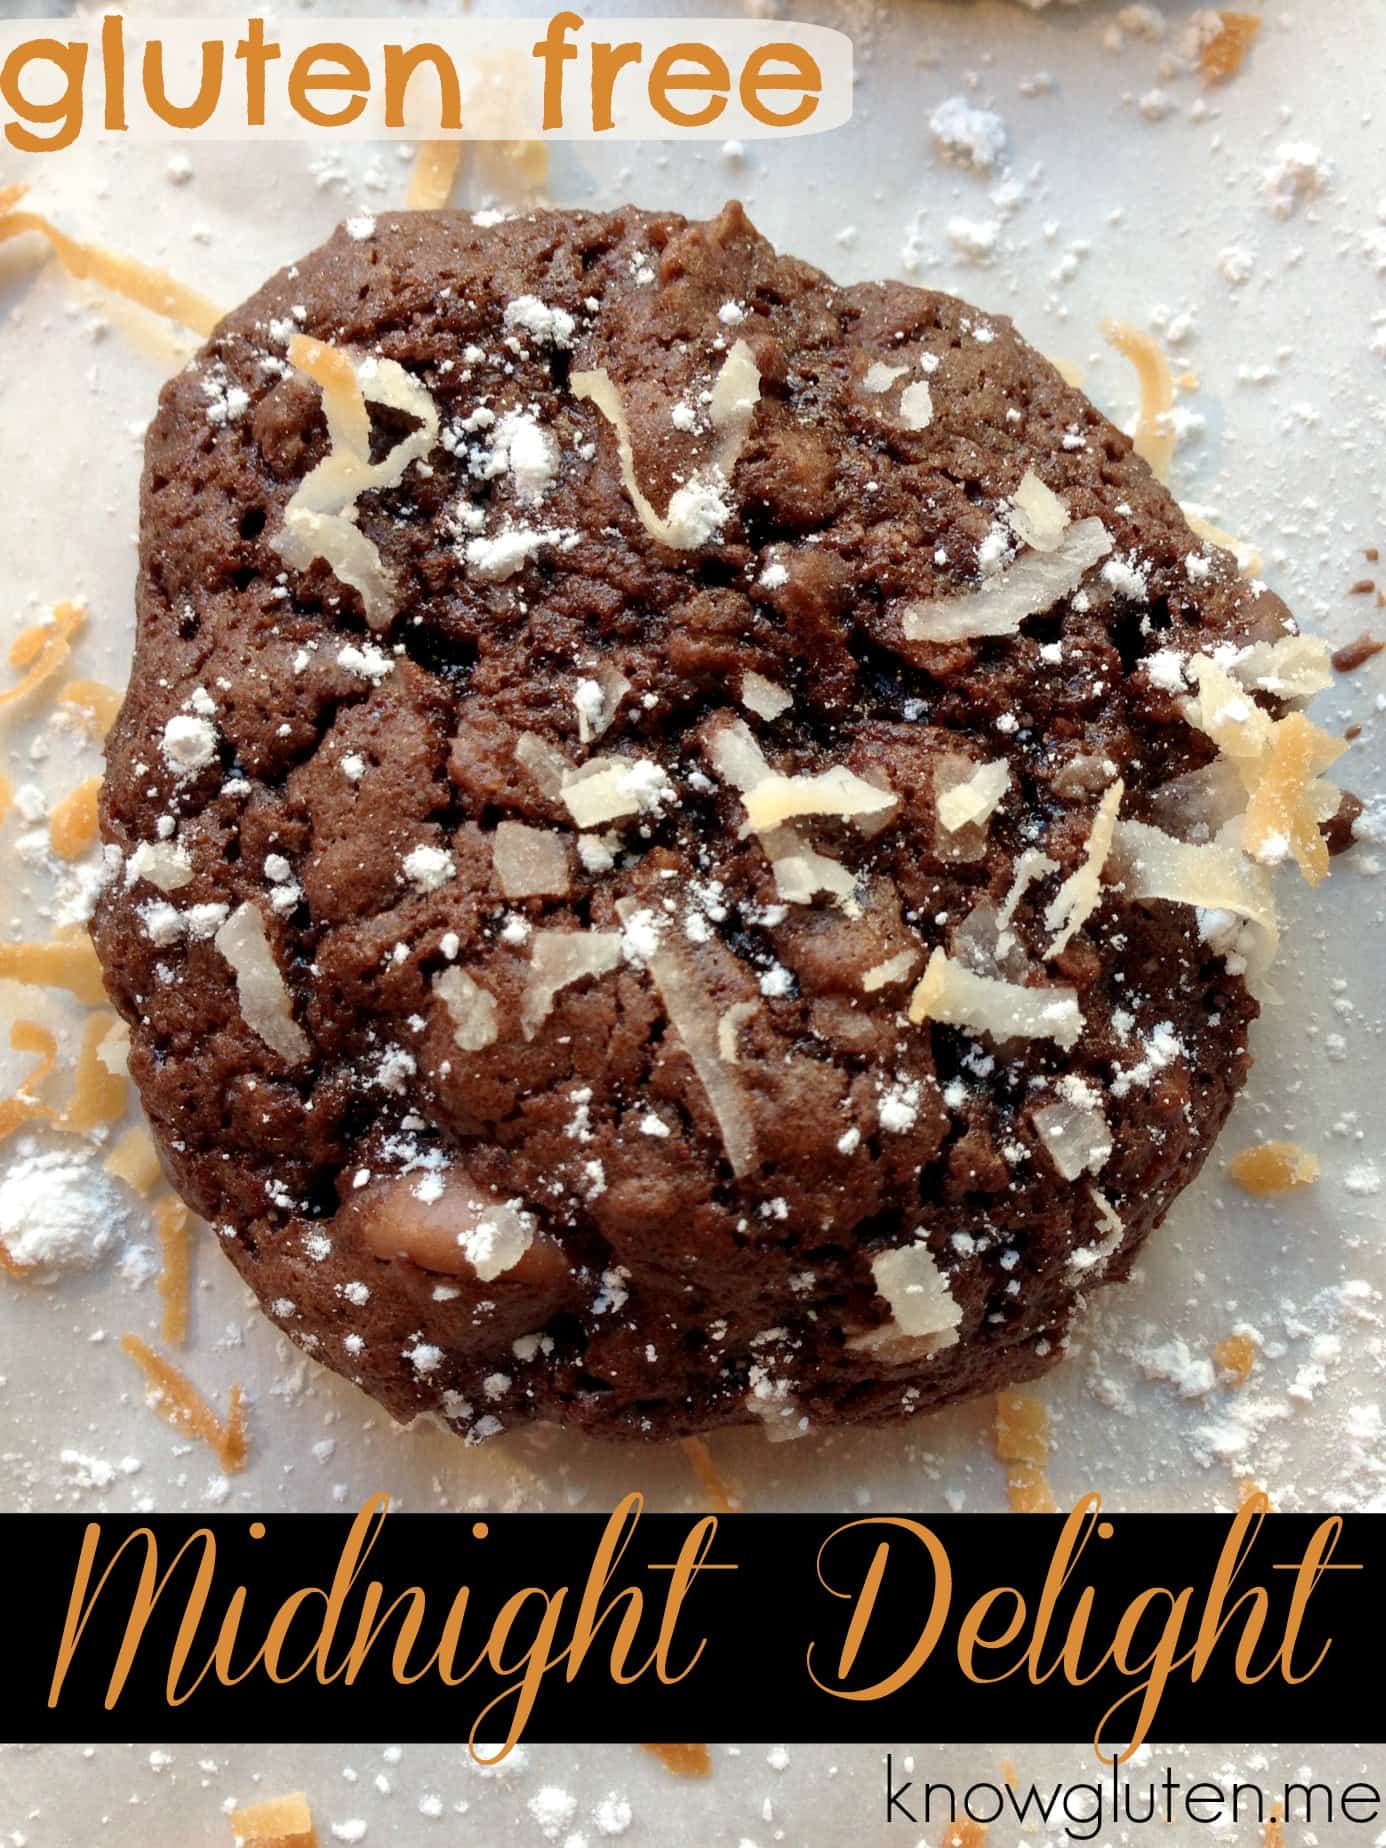 gluten free midnight delight Christmas cookies from knowgluten.me